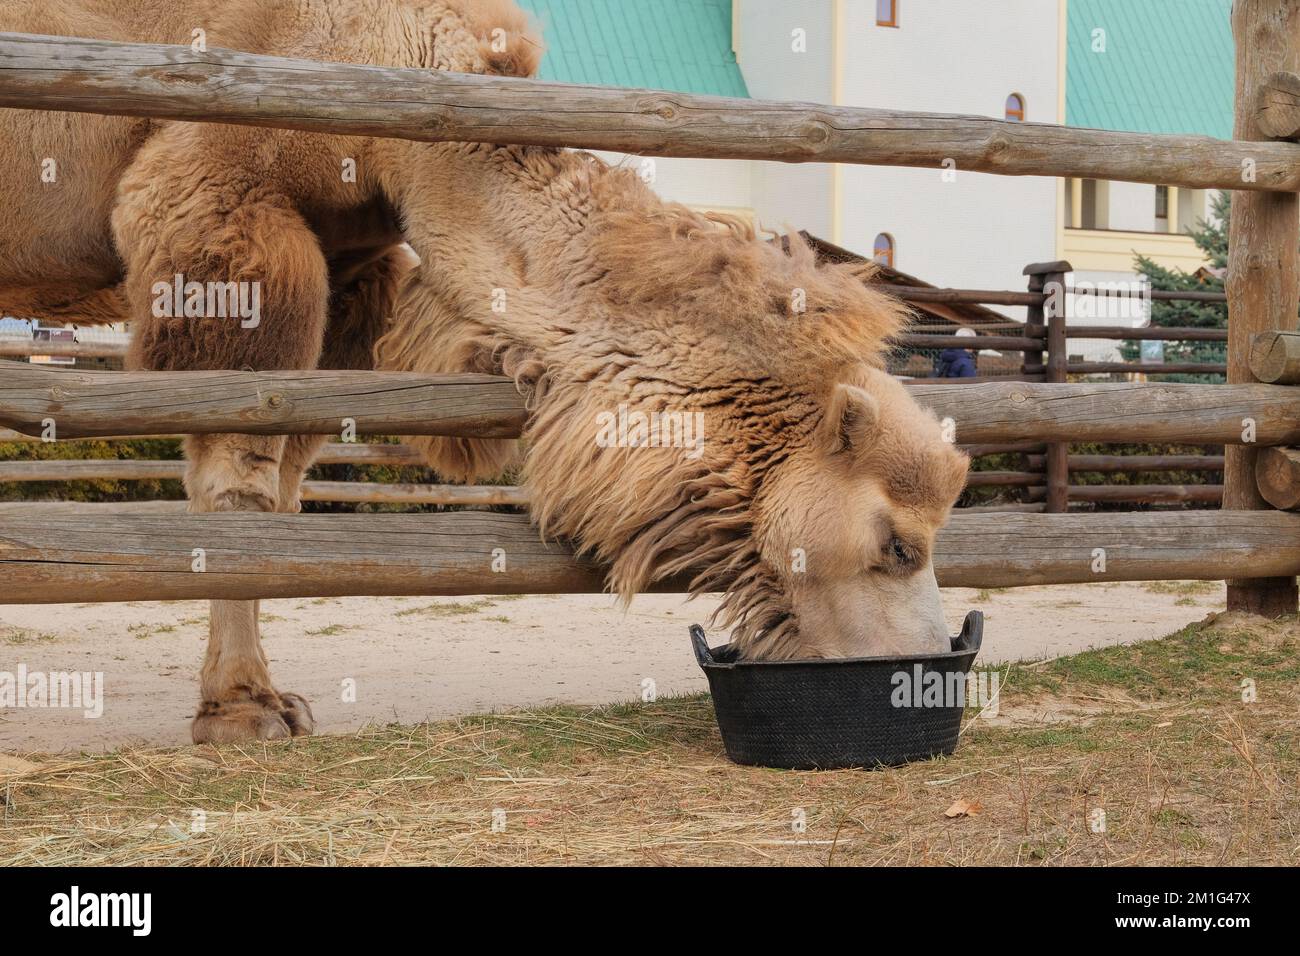 Camel drinks water at the zoo, close up. Keeping white camels in zoological parks. Stock Photo